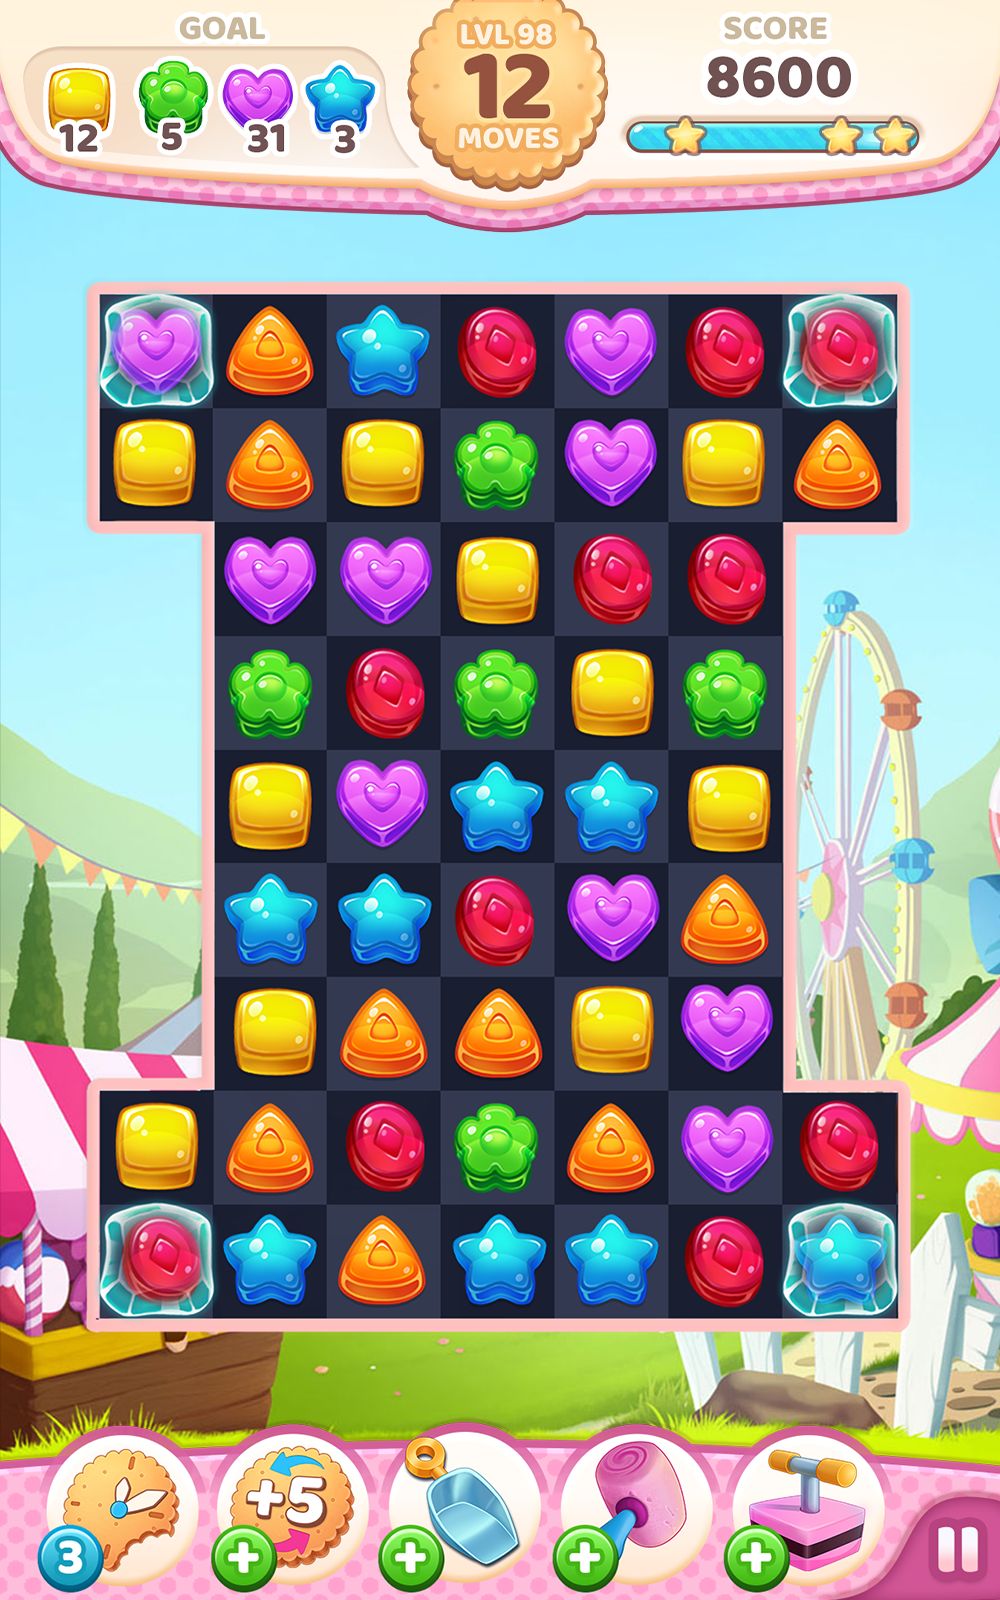 Gameplay of the Cookie Rush Match 3 for Android phone or tablet.